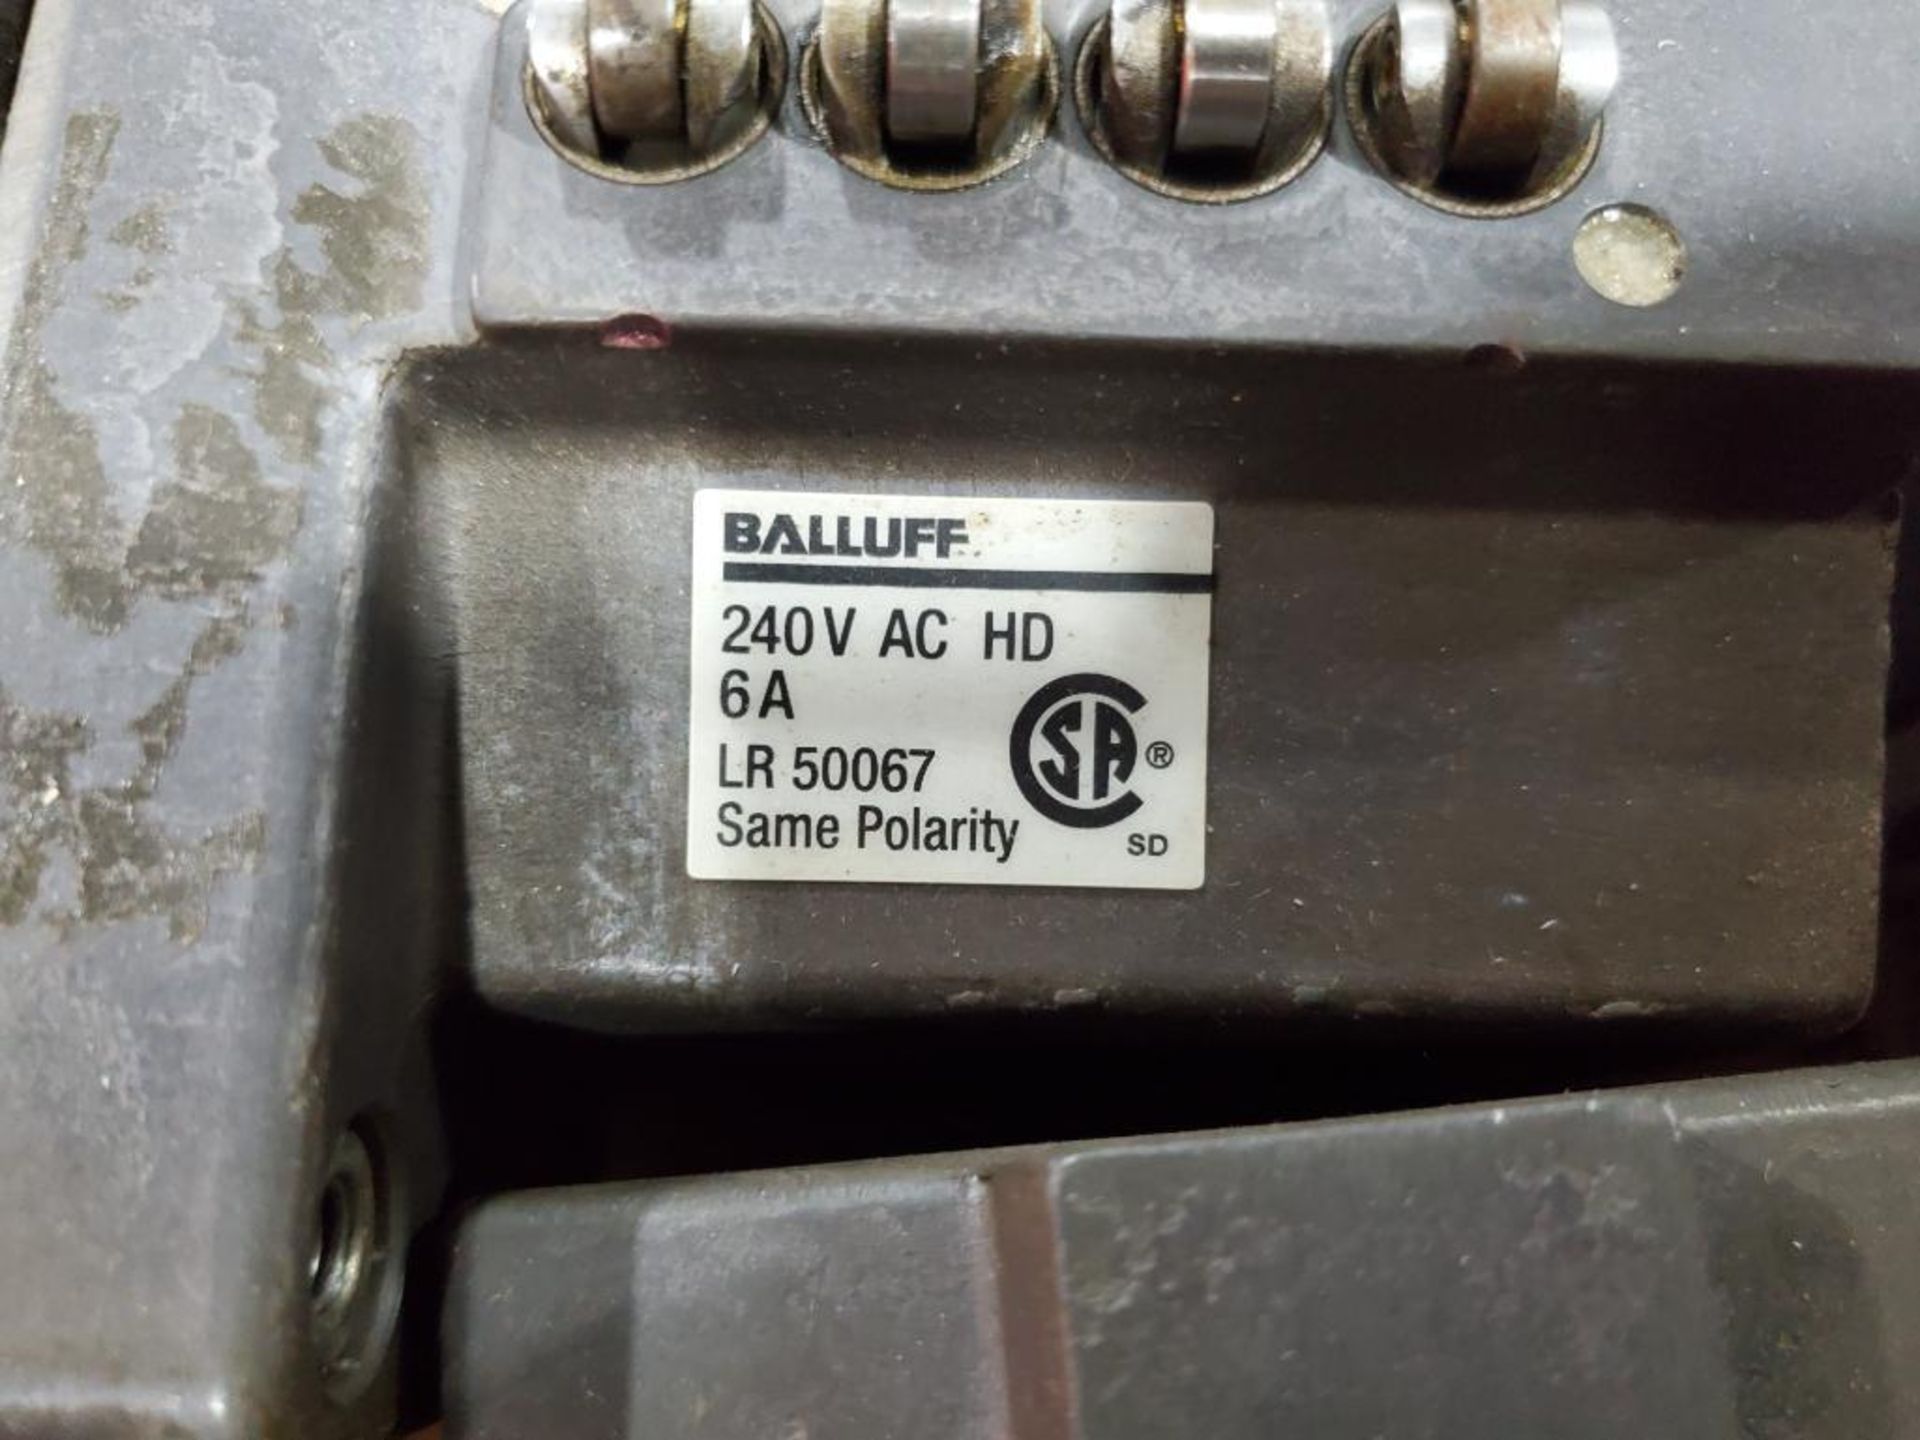 Qty 7 - Balluff switch. Part number BNS-113-004-L12-100. - Image 3 of 6